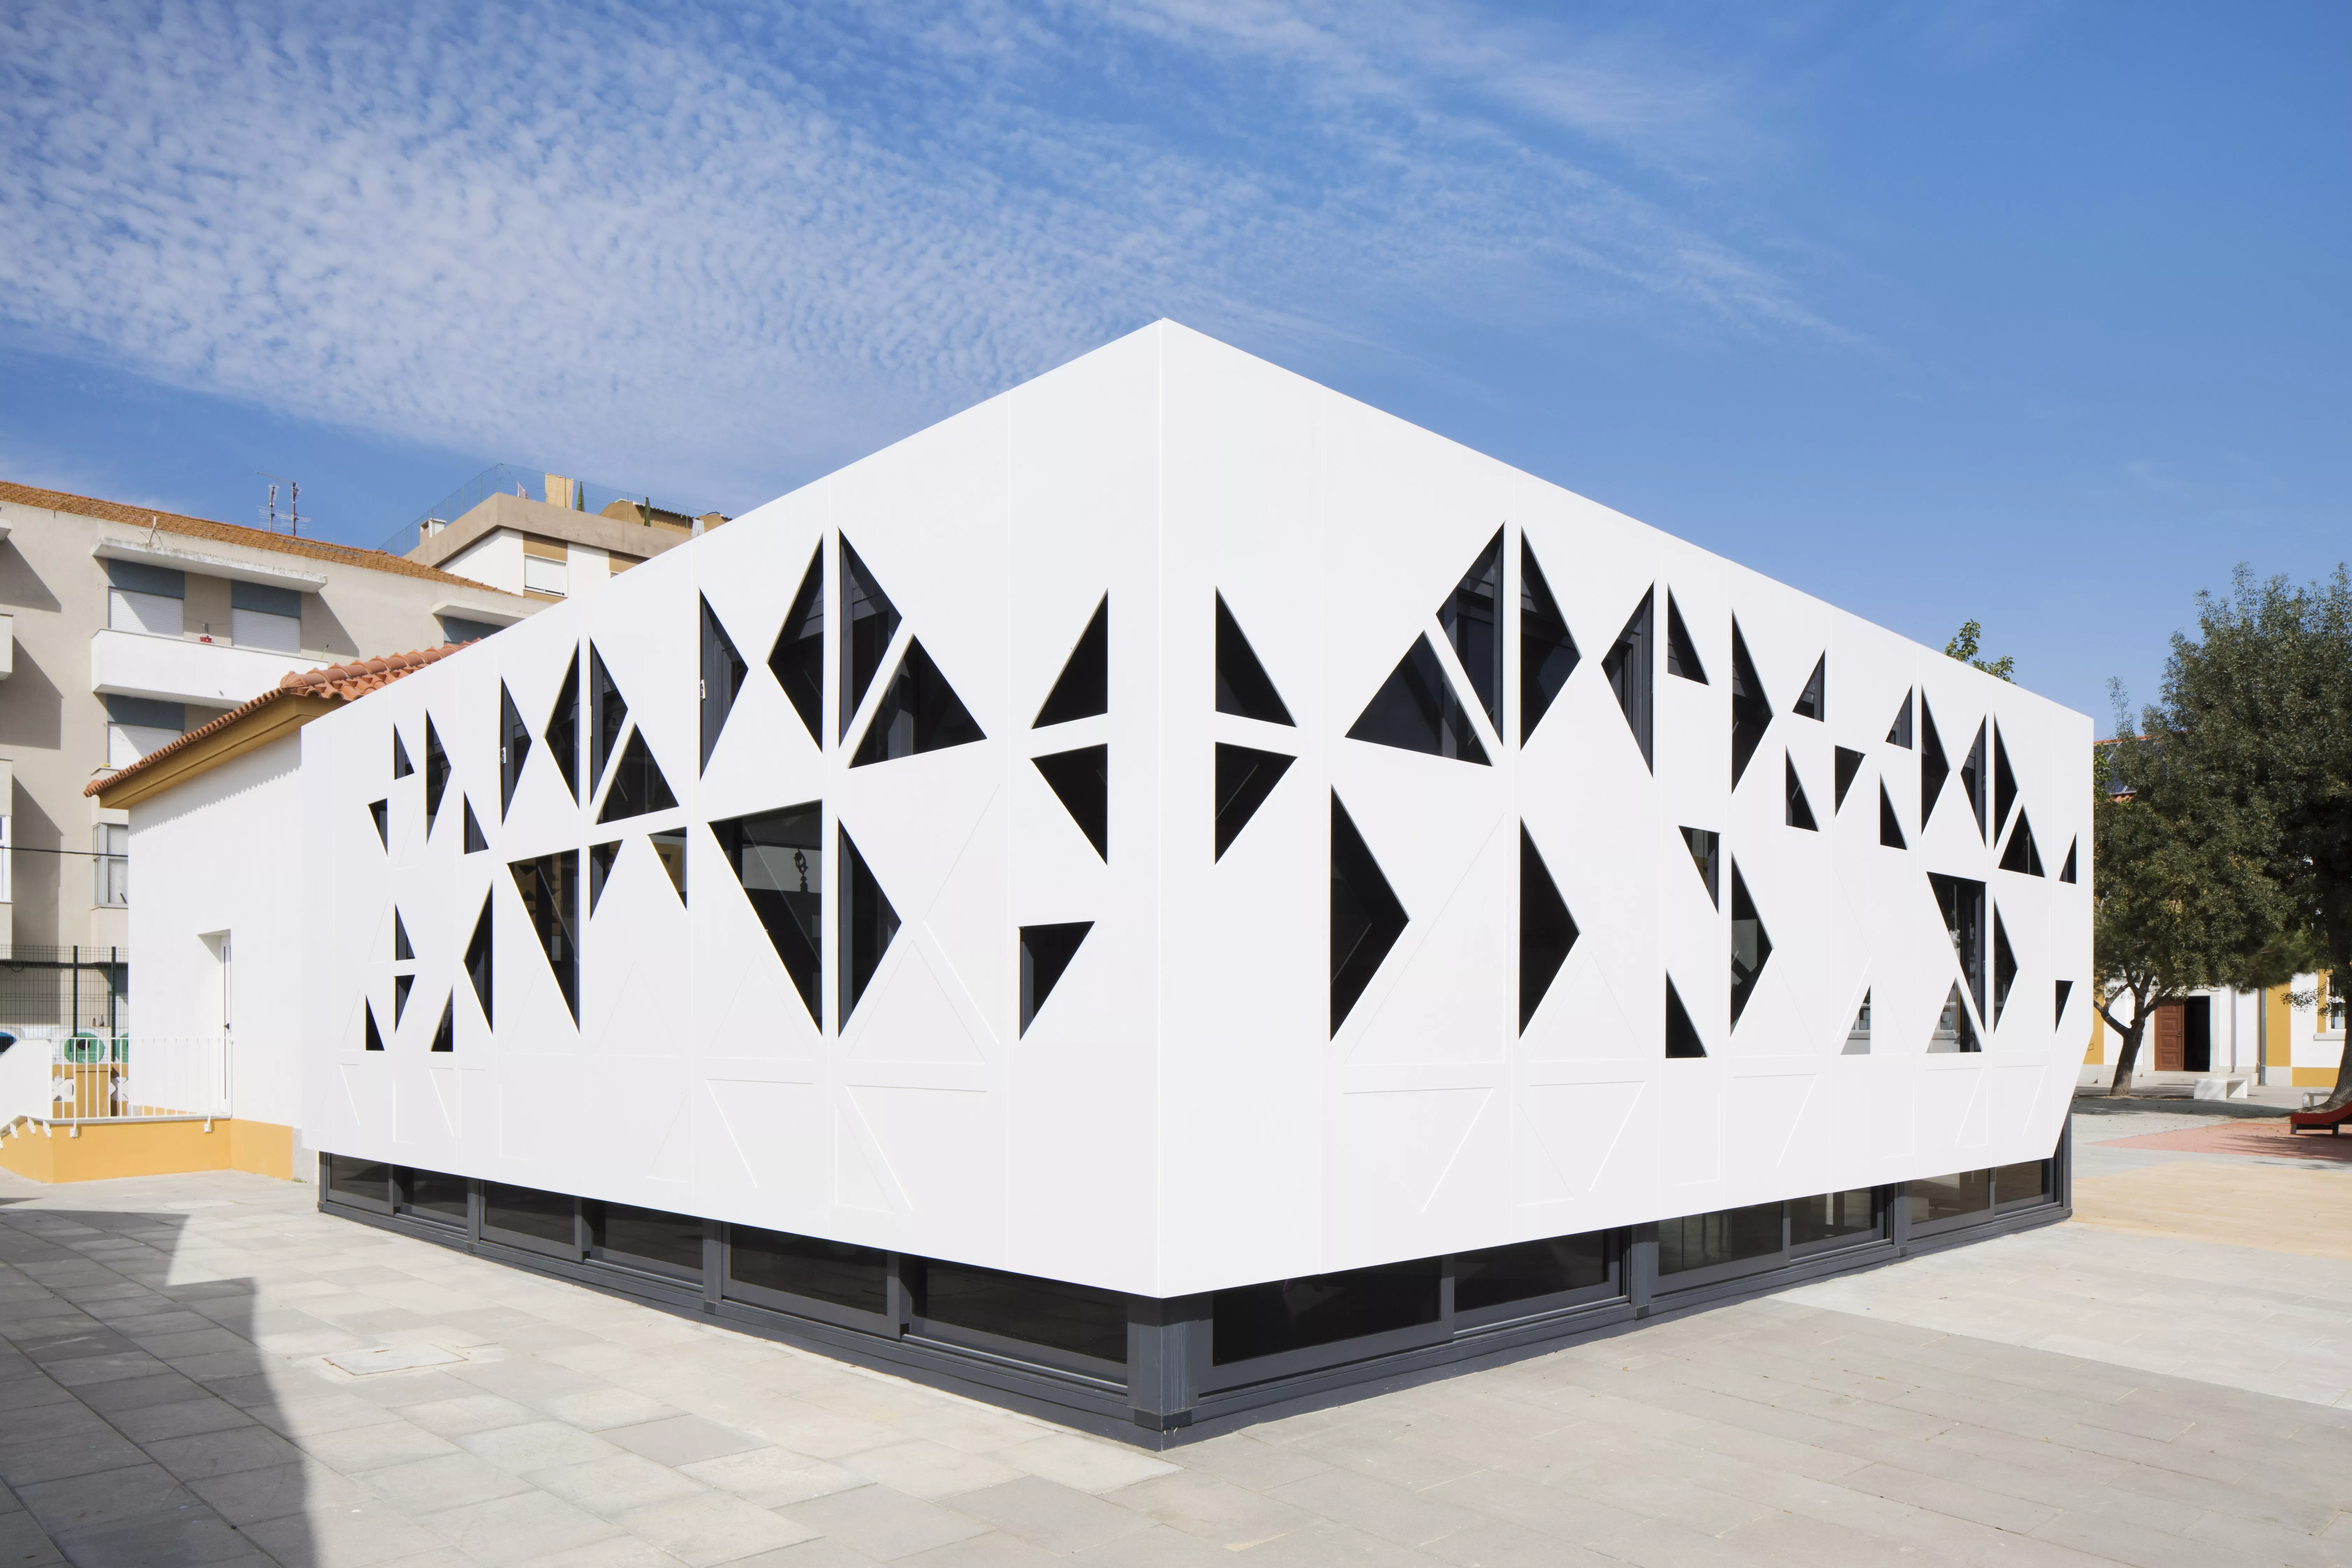 Spectacular HIMACS façade: traditional school architecture meets high-tech material 